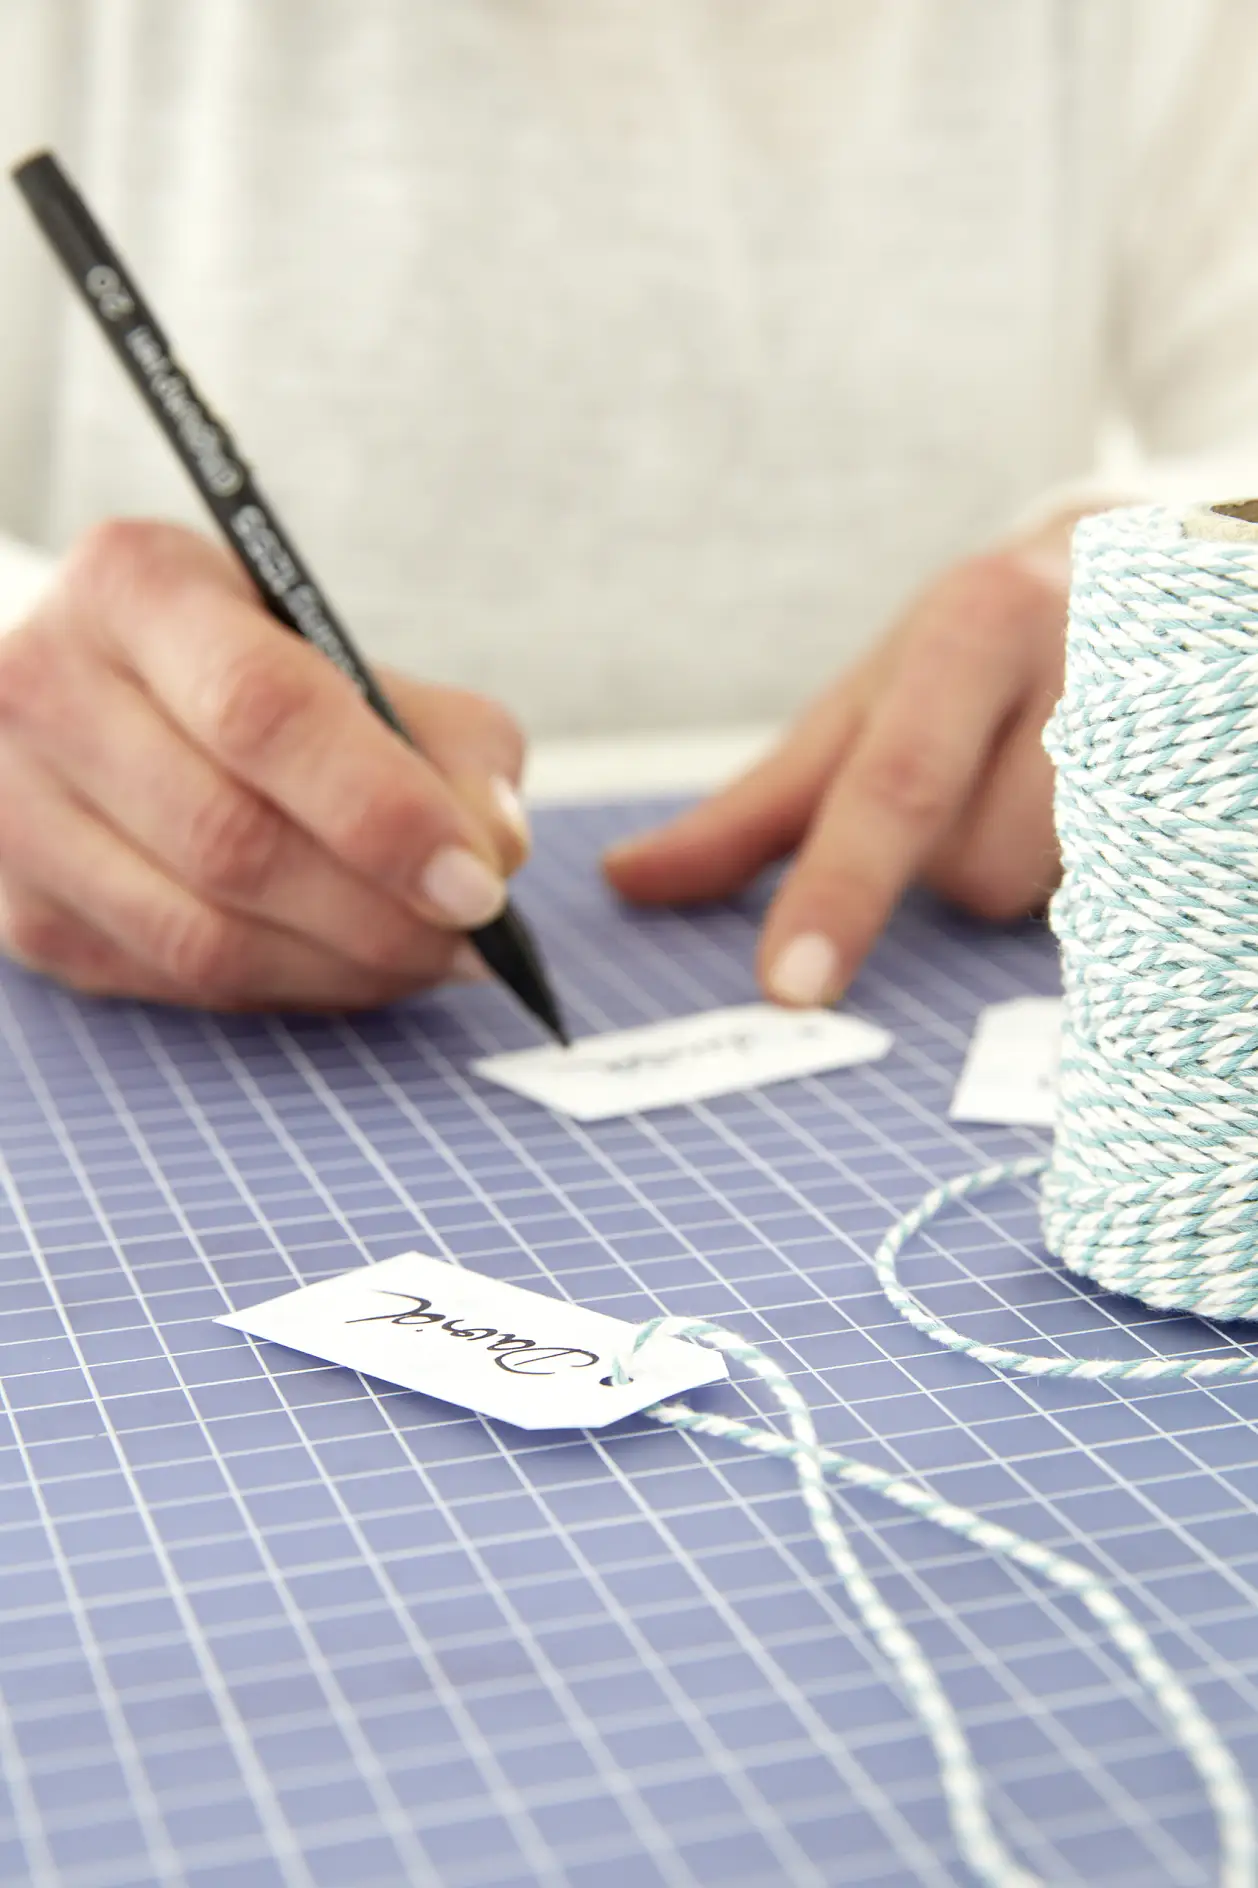 Cut small labels from the remaining paper, write names on them using the calligraphy pen, punch a hole on the upper side and attach the labels to the pouch using the string.